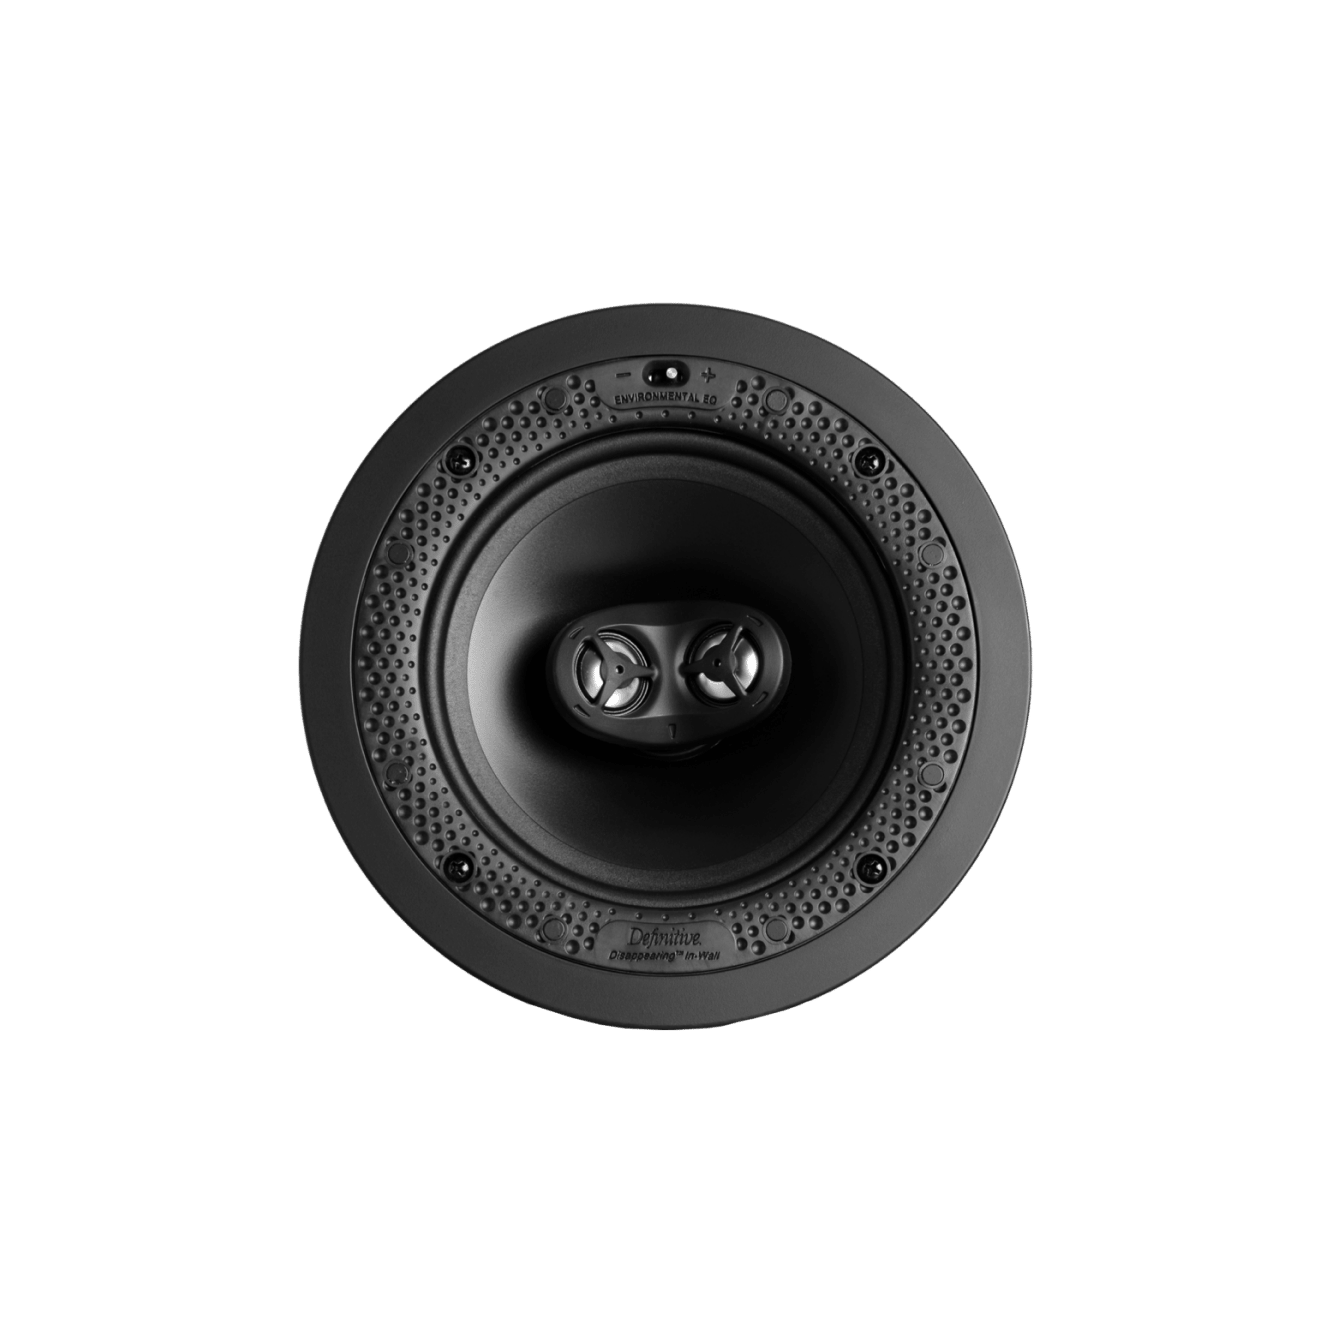 Definitive Technology DI 6.5STR - In-Wall/In-Ceiling Speakers